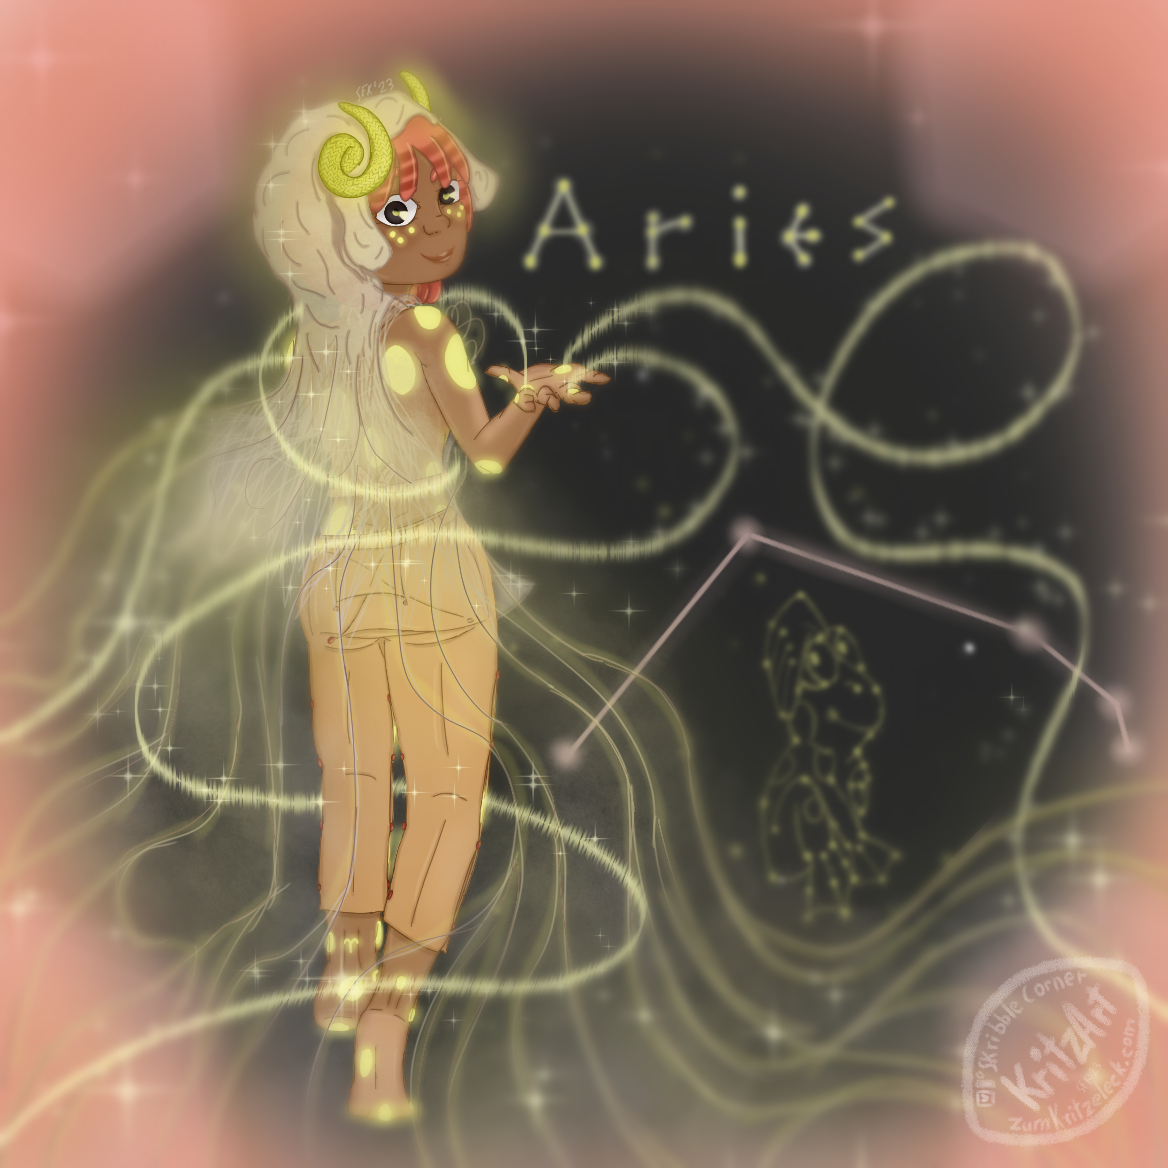 Fabric Of The Universe by Aeires on DeviantArt